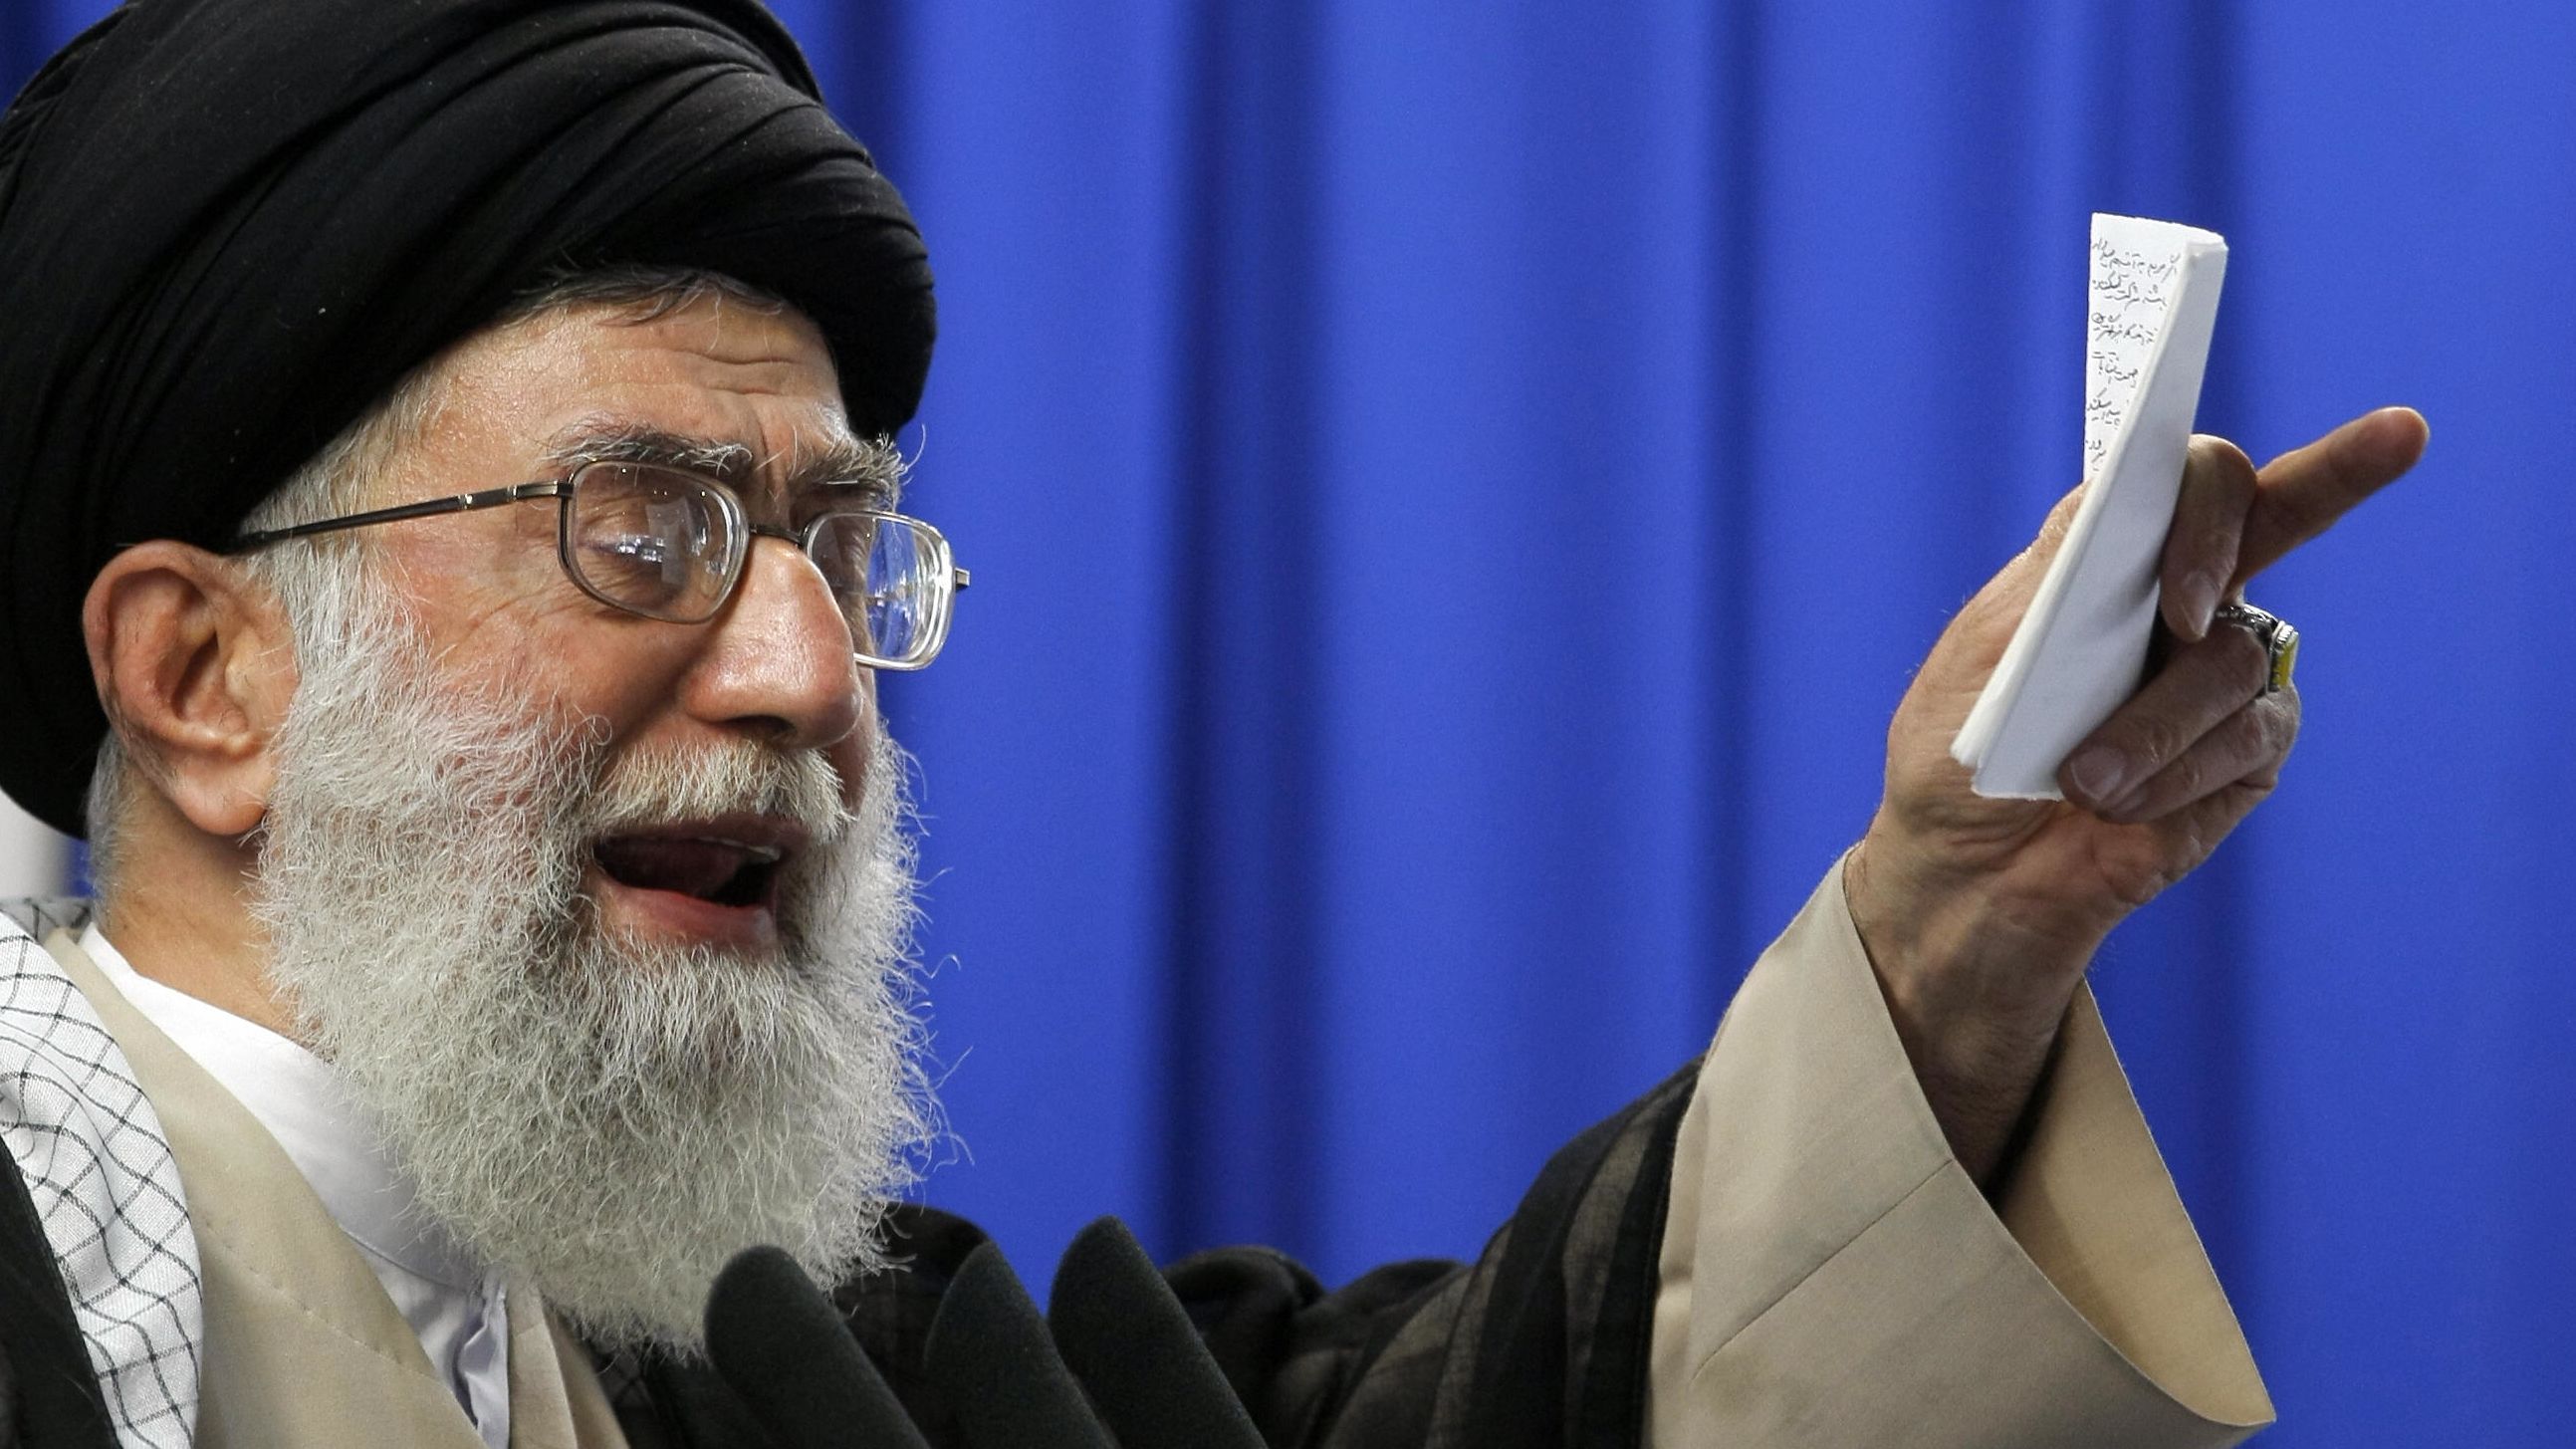 Ayatollah Ali Khamenei, pictured in June 2009, says Iran won't allow inspection of its military facilities.